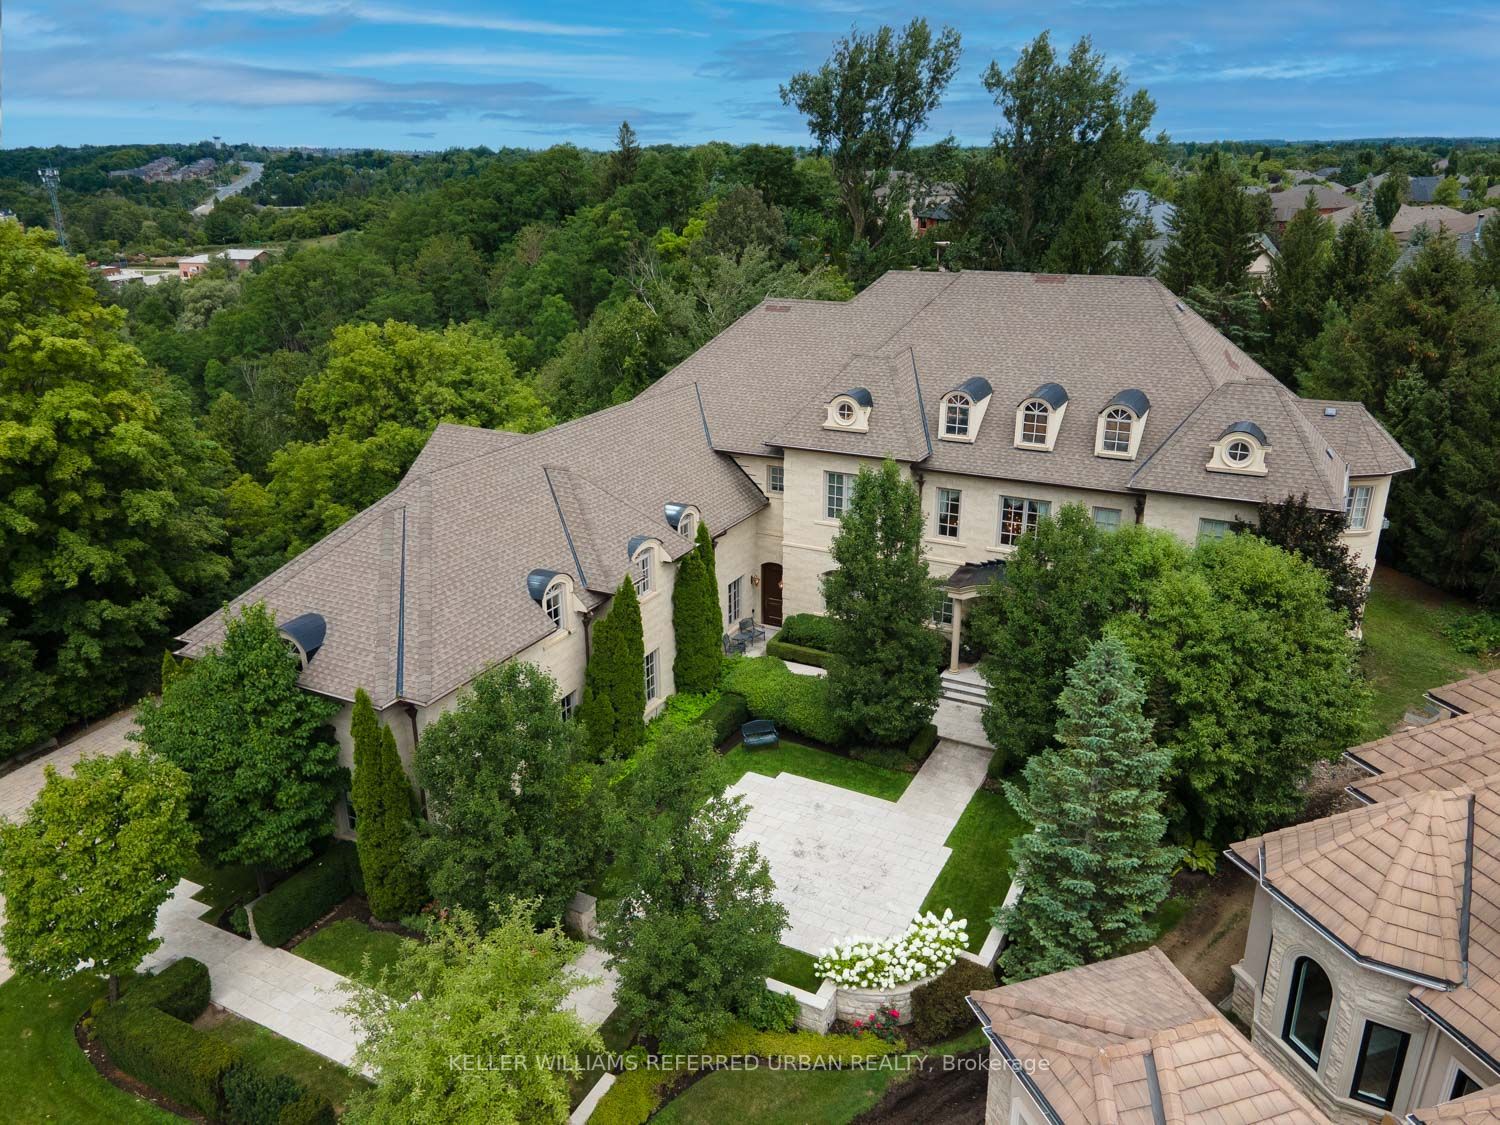 New property listed in Kleinburg, Vaughan